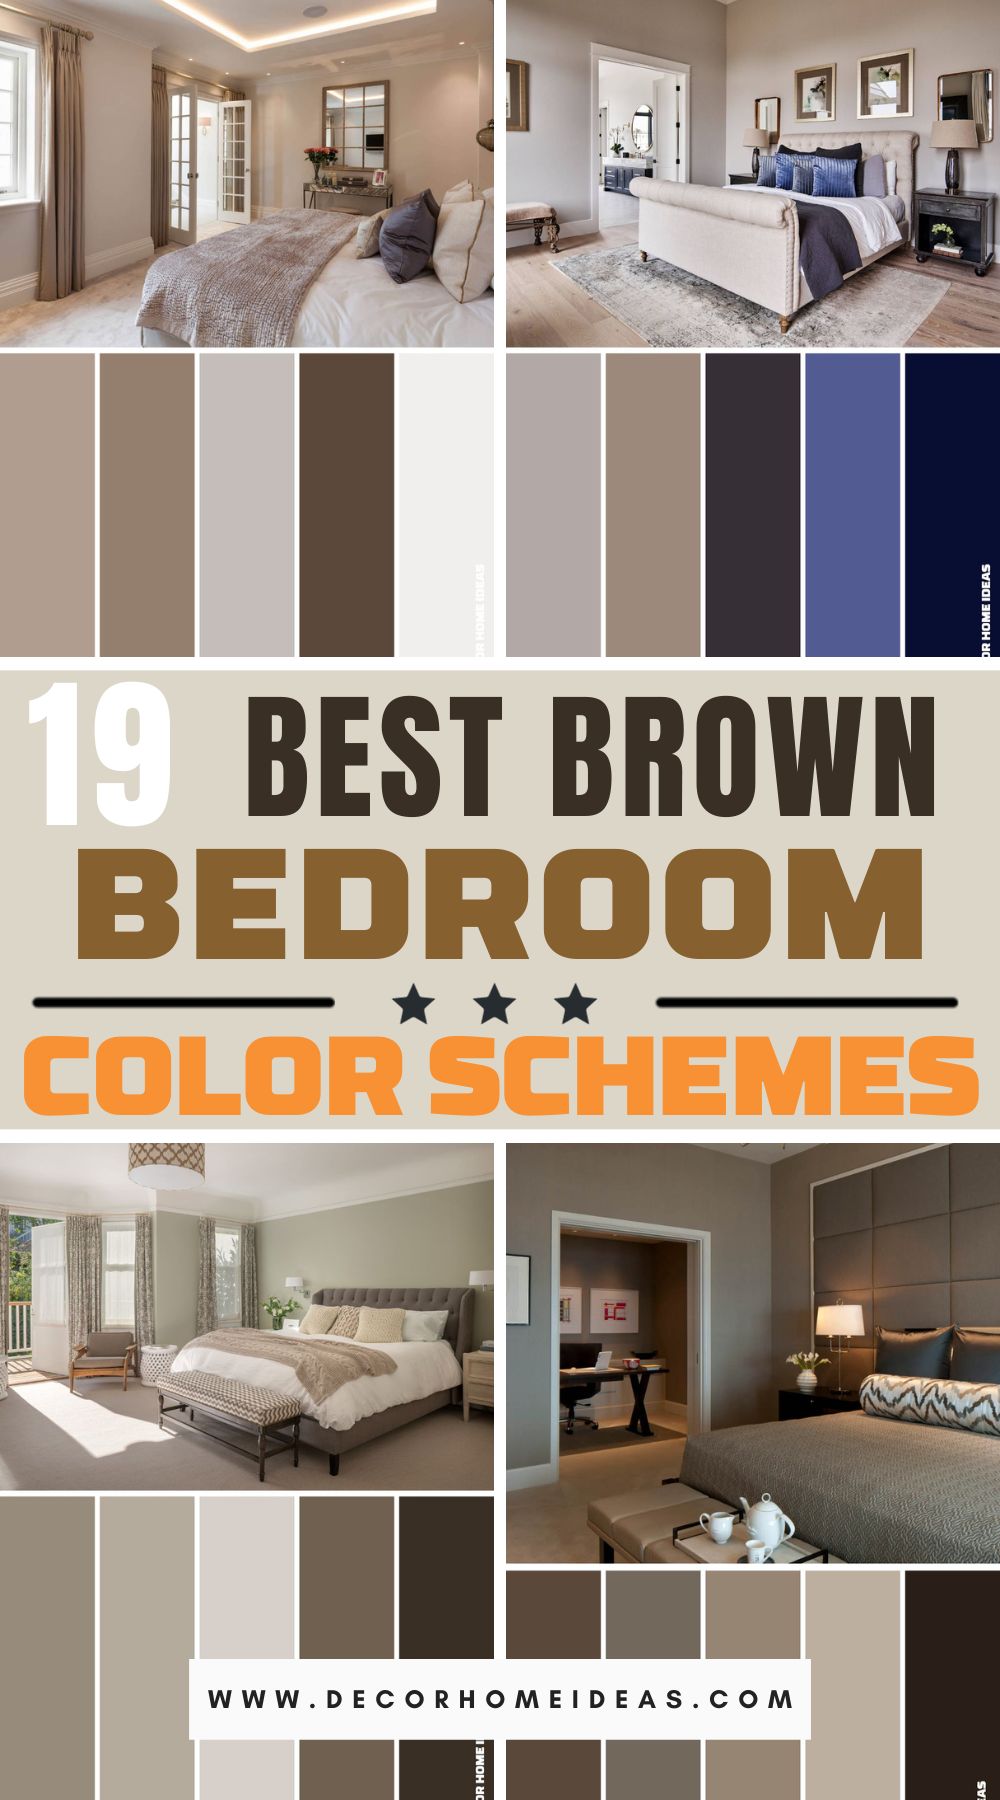 Wrap yourself in comfort with these 19 cozy brown bedroom color schemes. Discover the perfect shades to create a warm and inviting haven for a truly restful night's sleep.